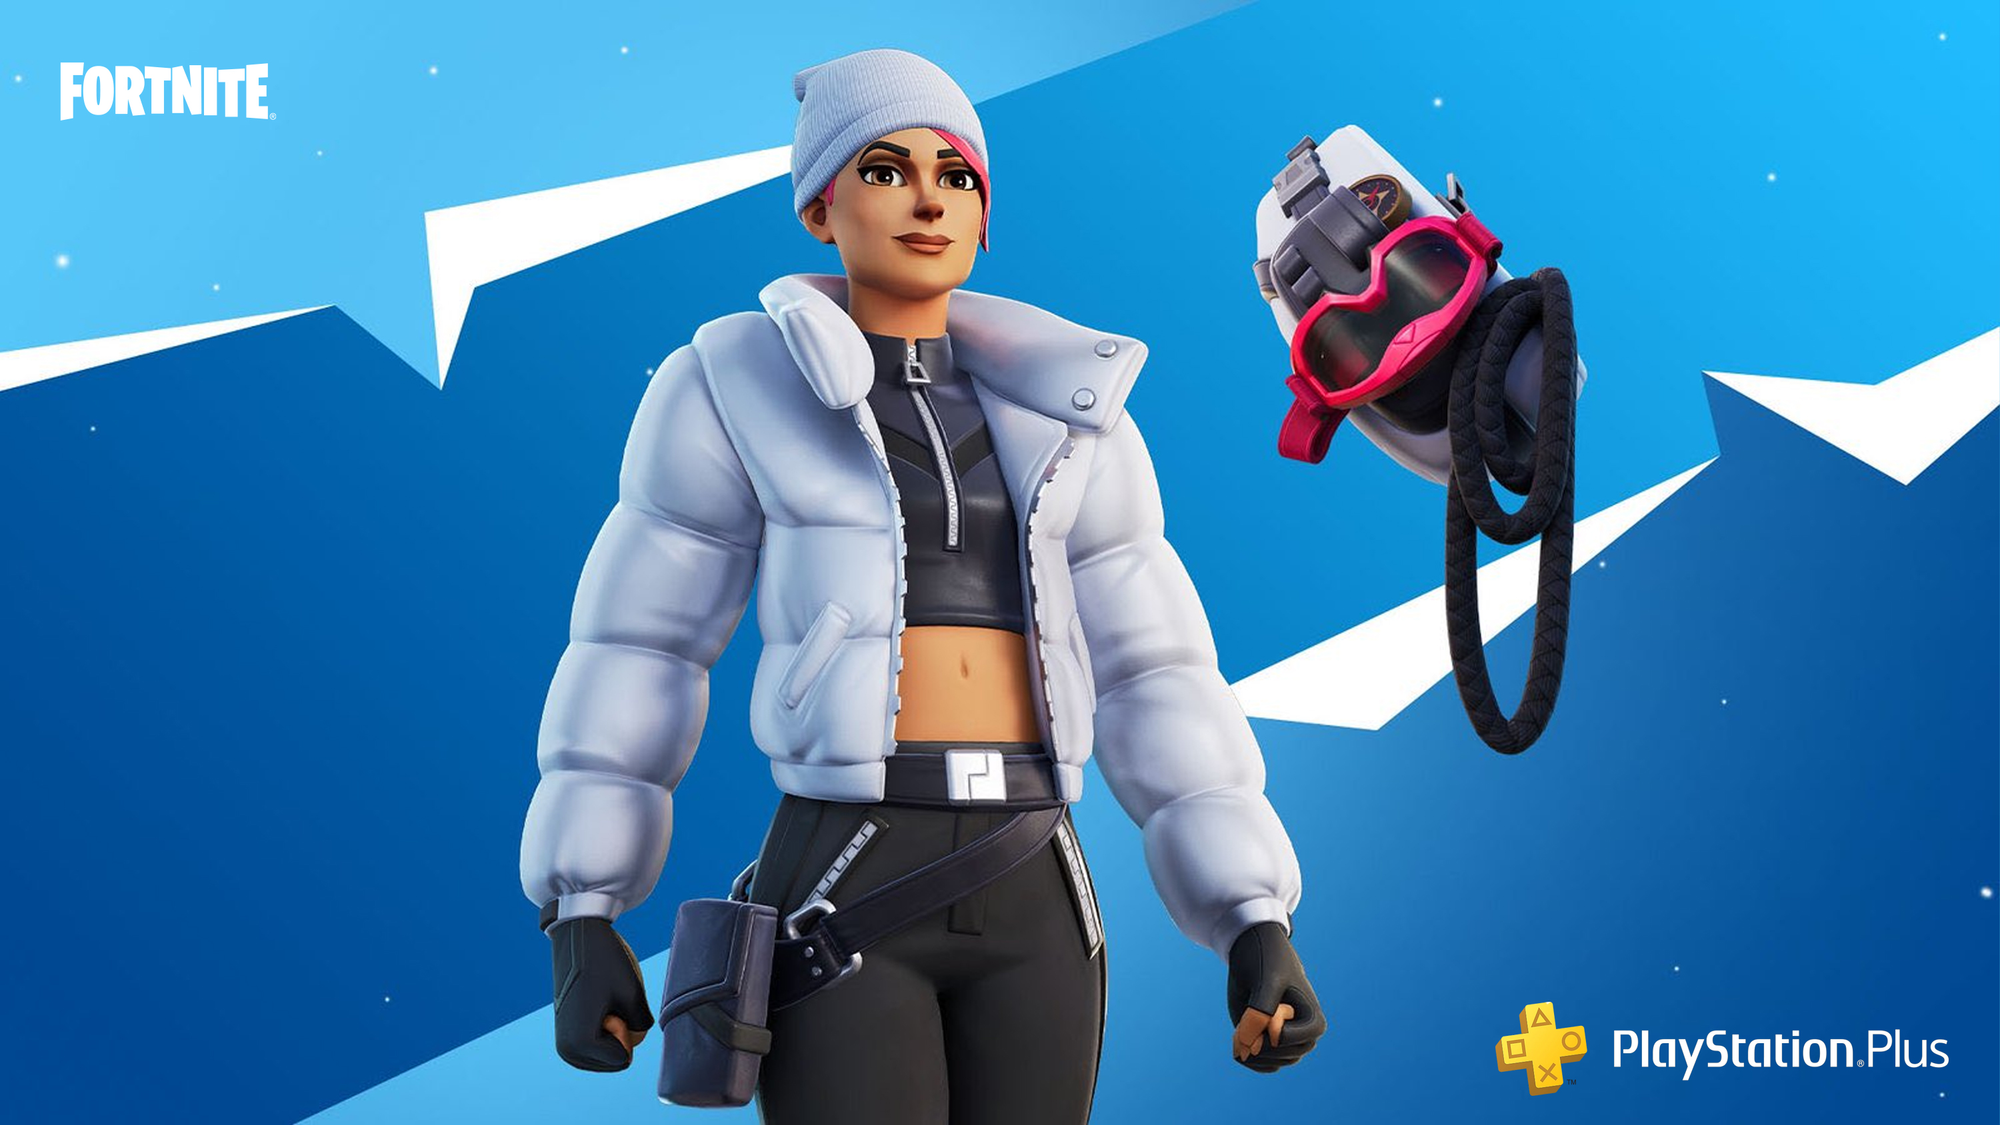 Fortnite PlayStation Plus Celebration Pack 18 available now